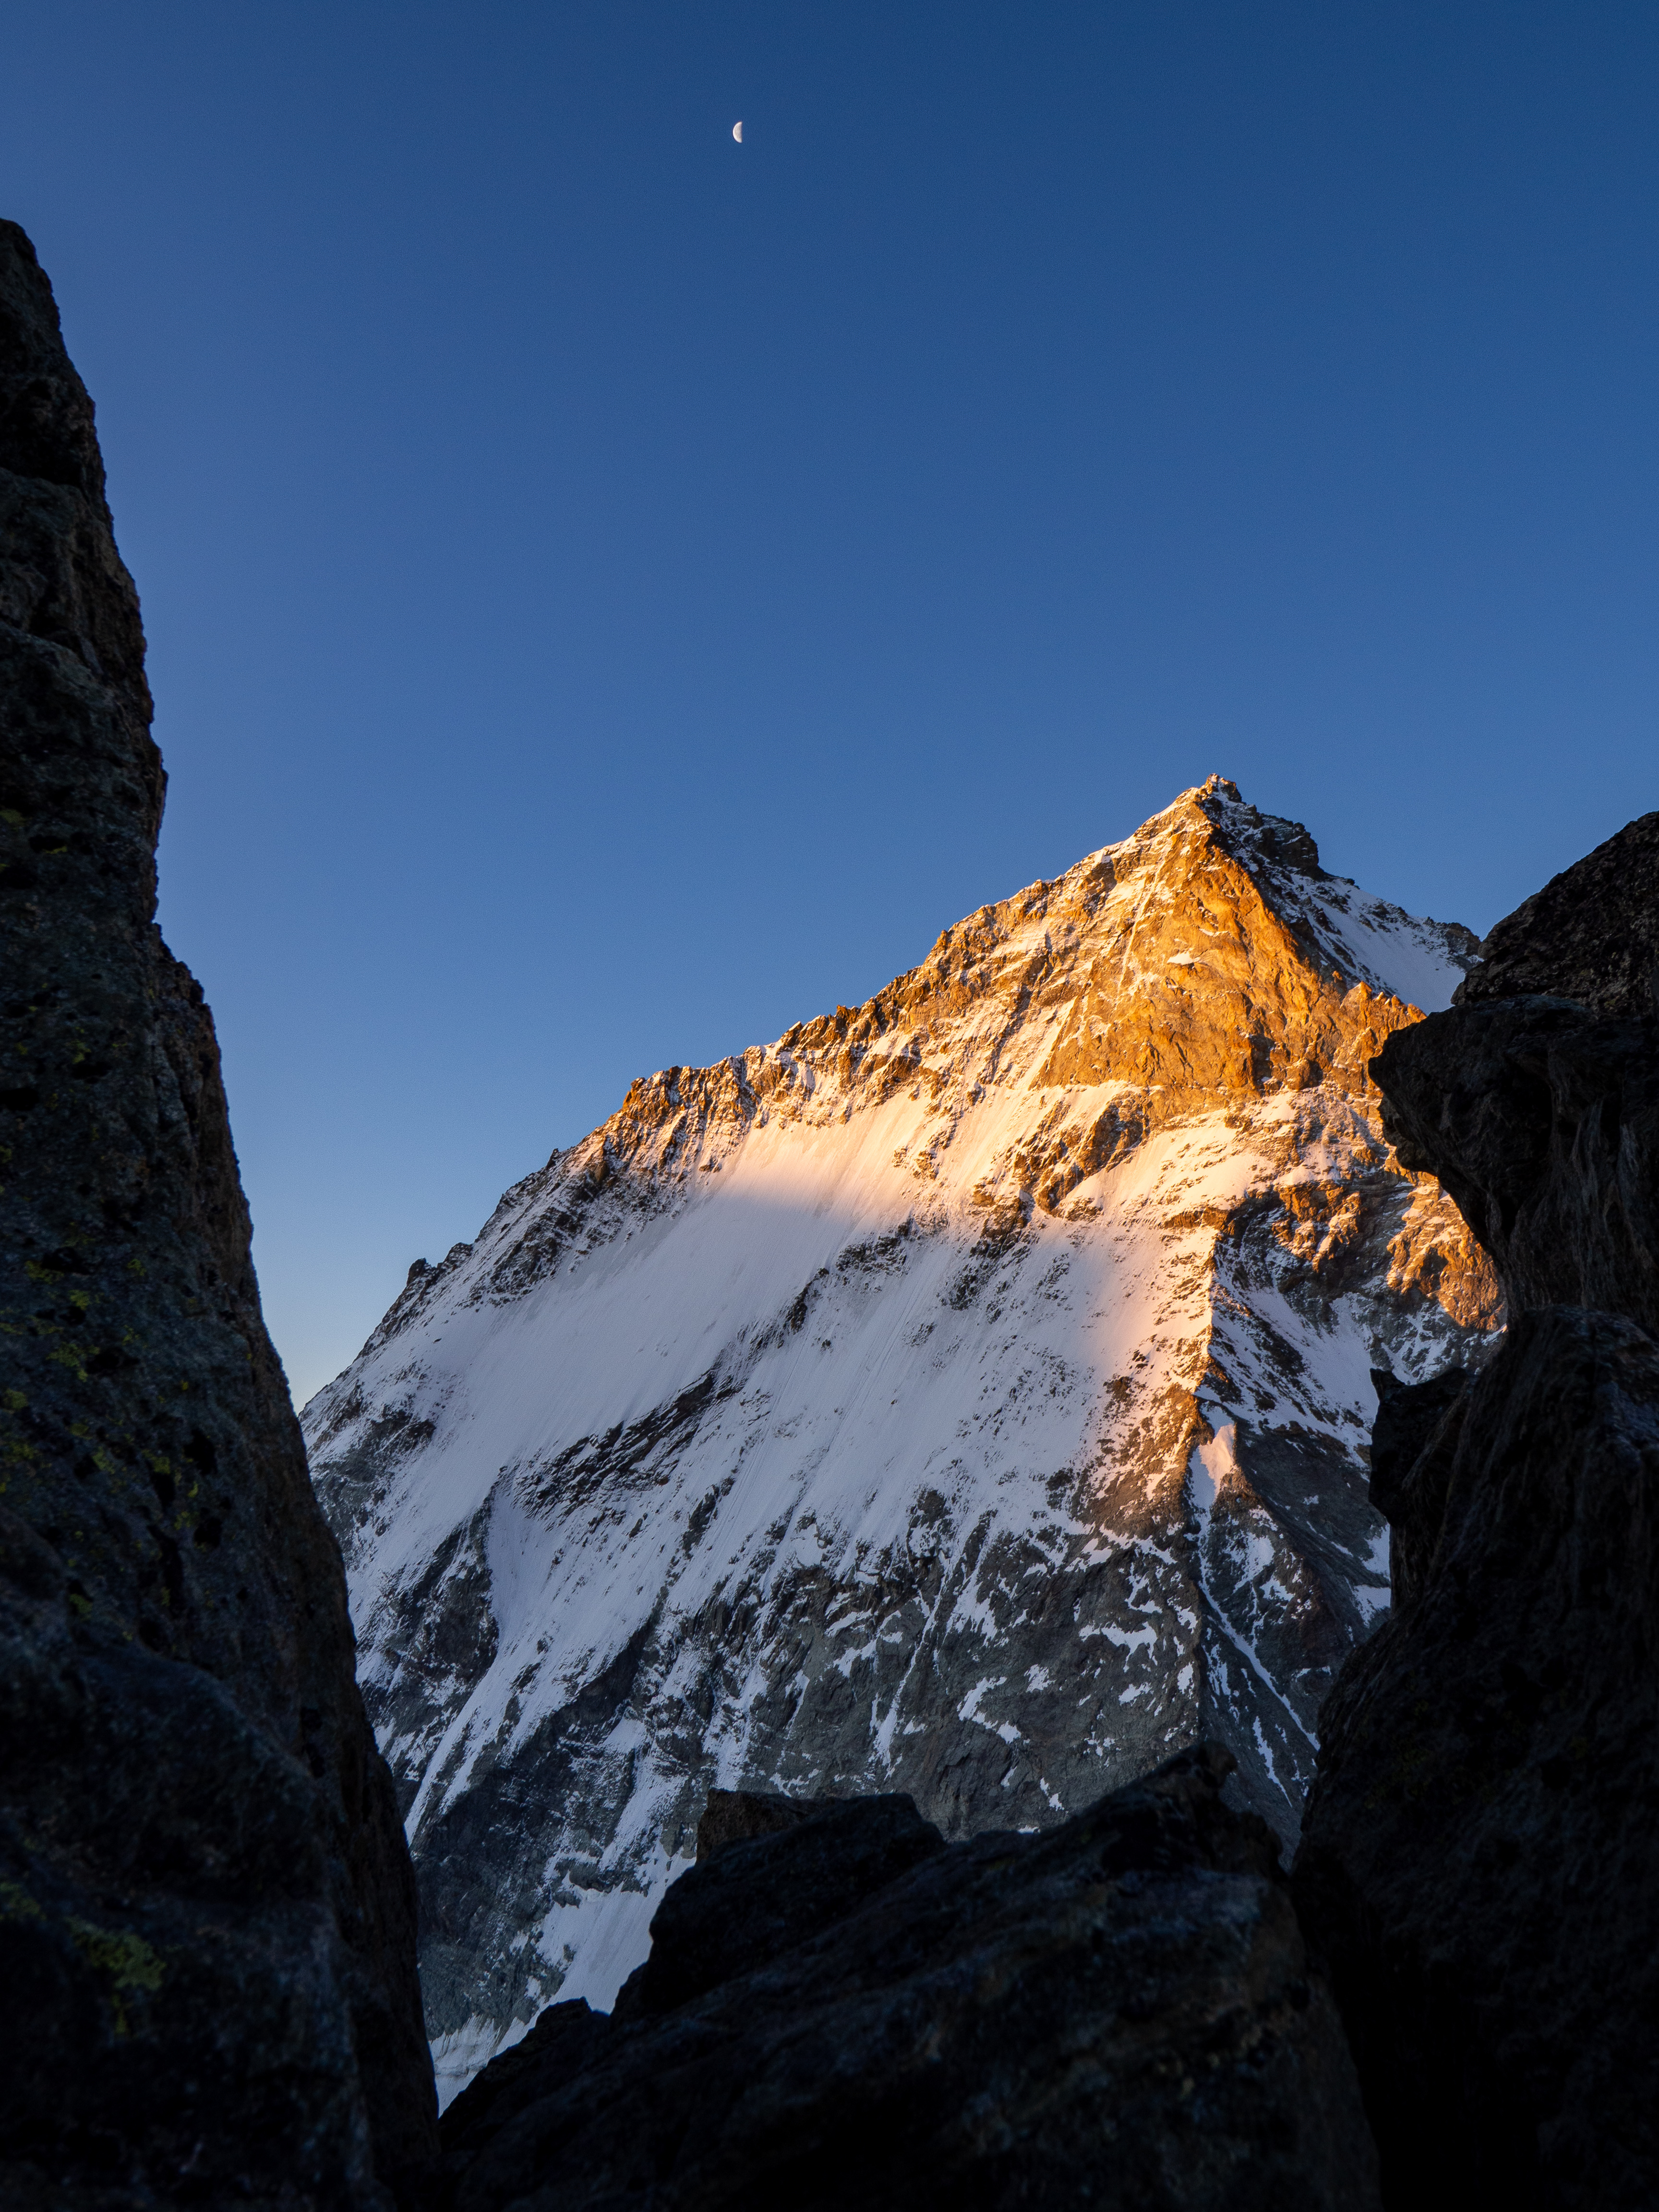 North Face of the Dent Blanche in the morning light